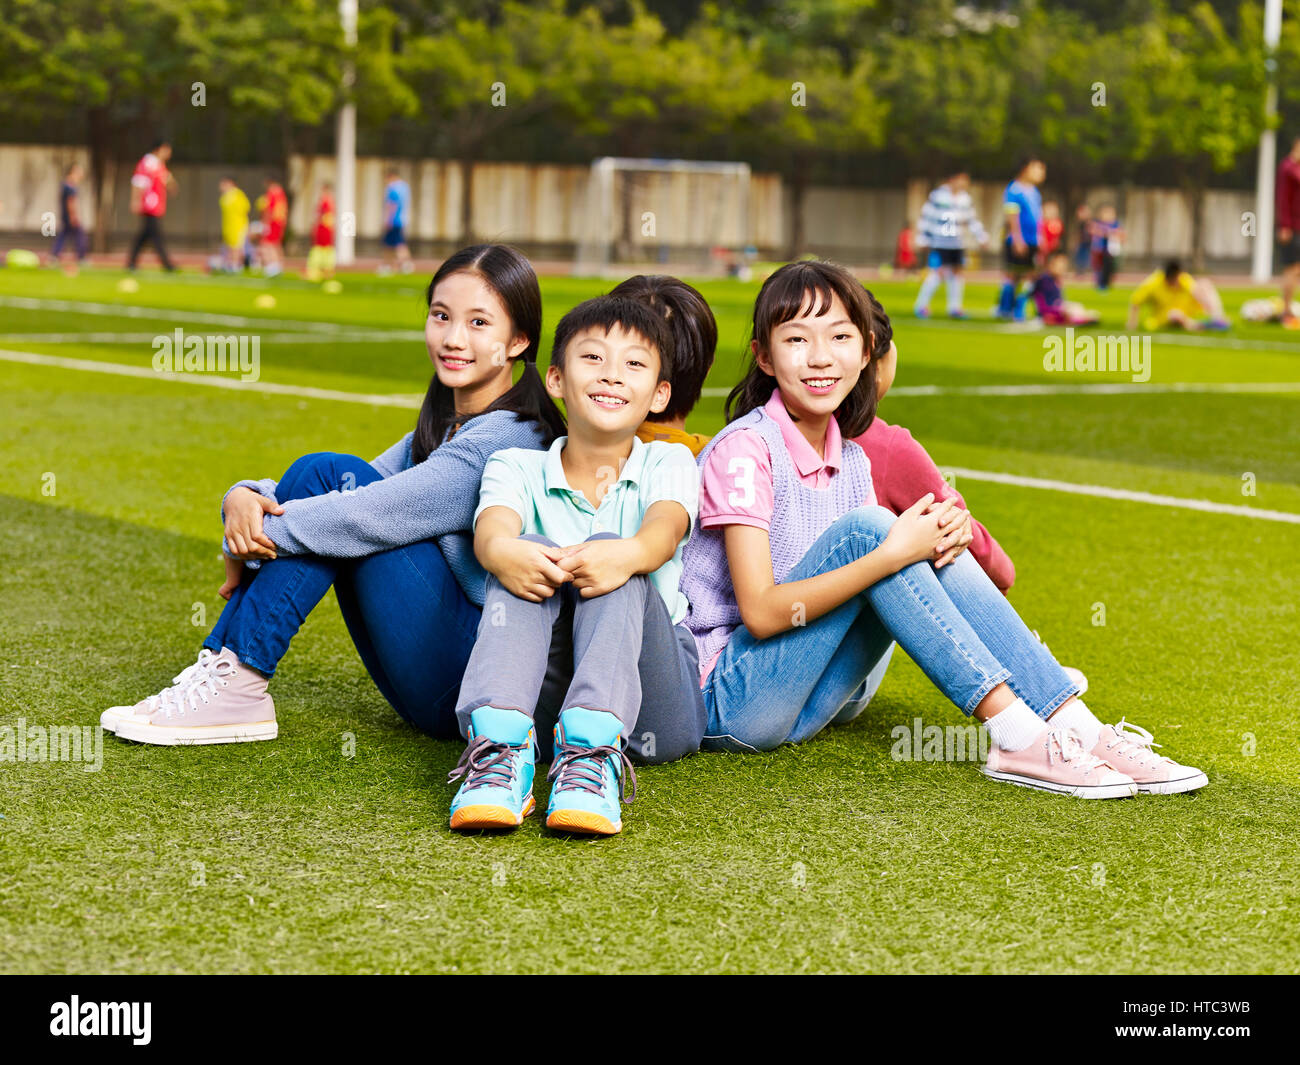 group of happy smiling elementary school boys and girls sitting on grass of playground. Stock Photo